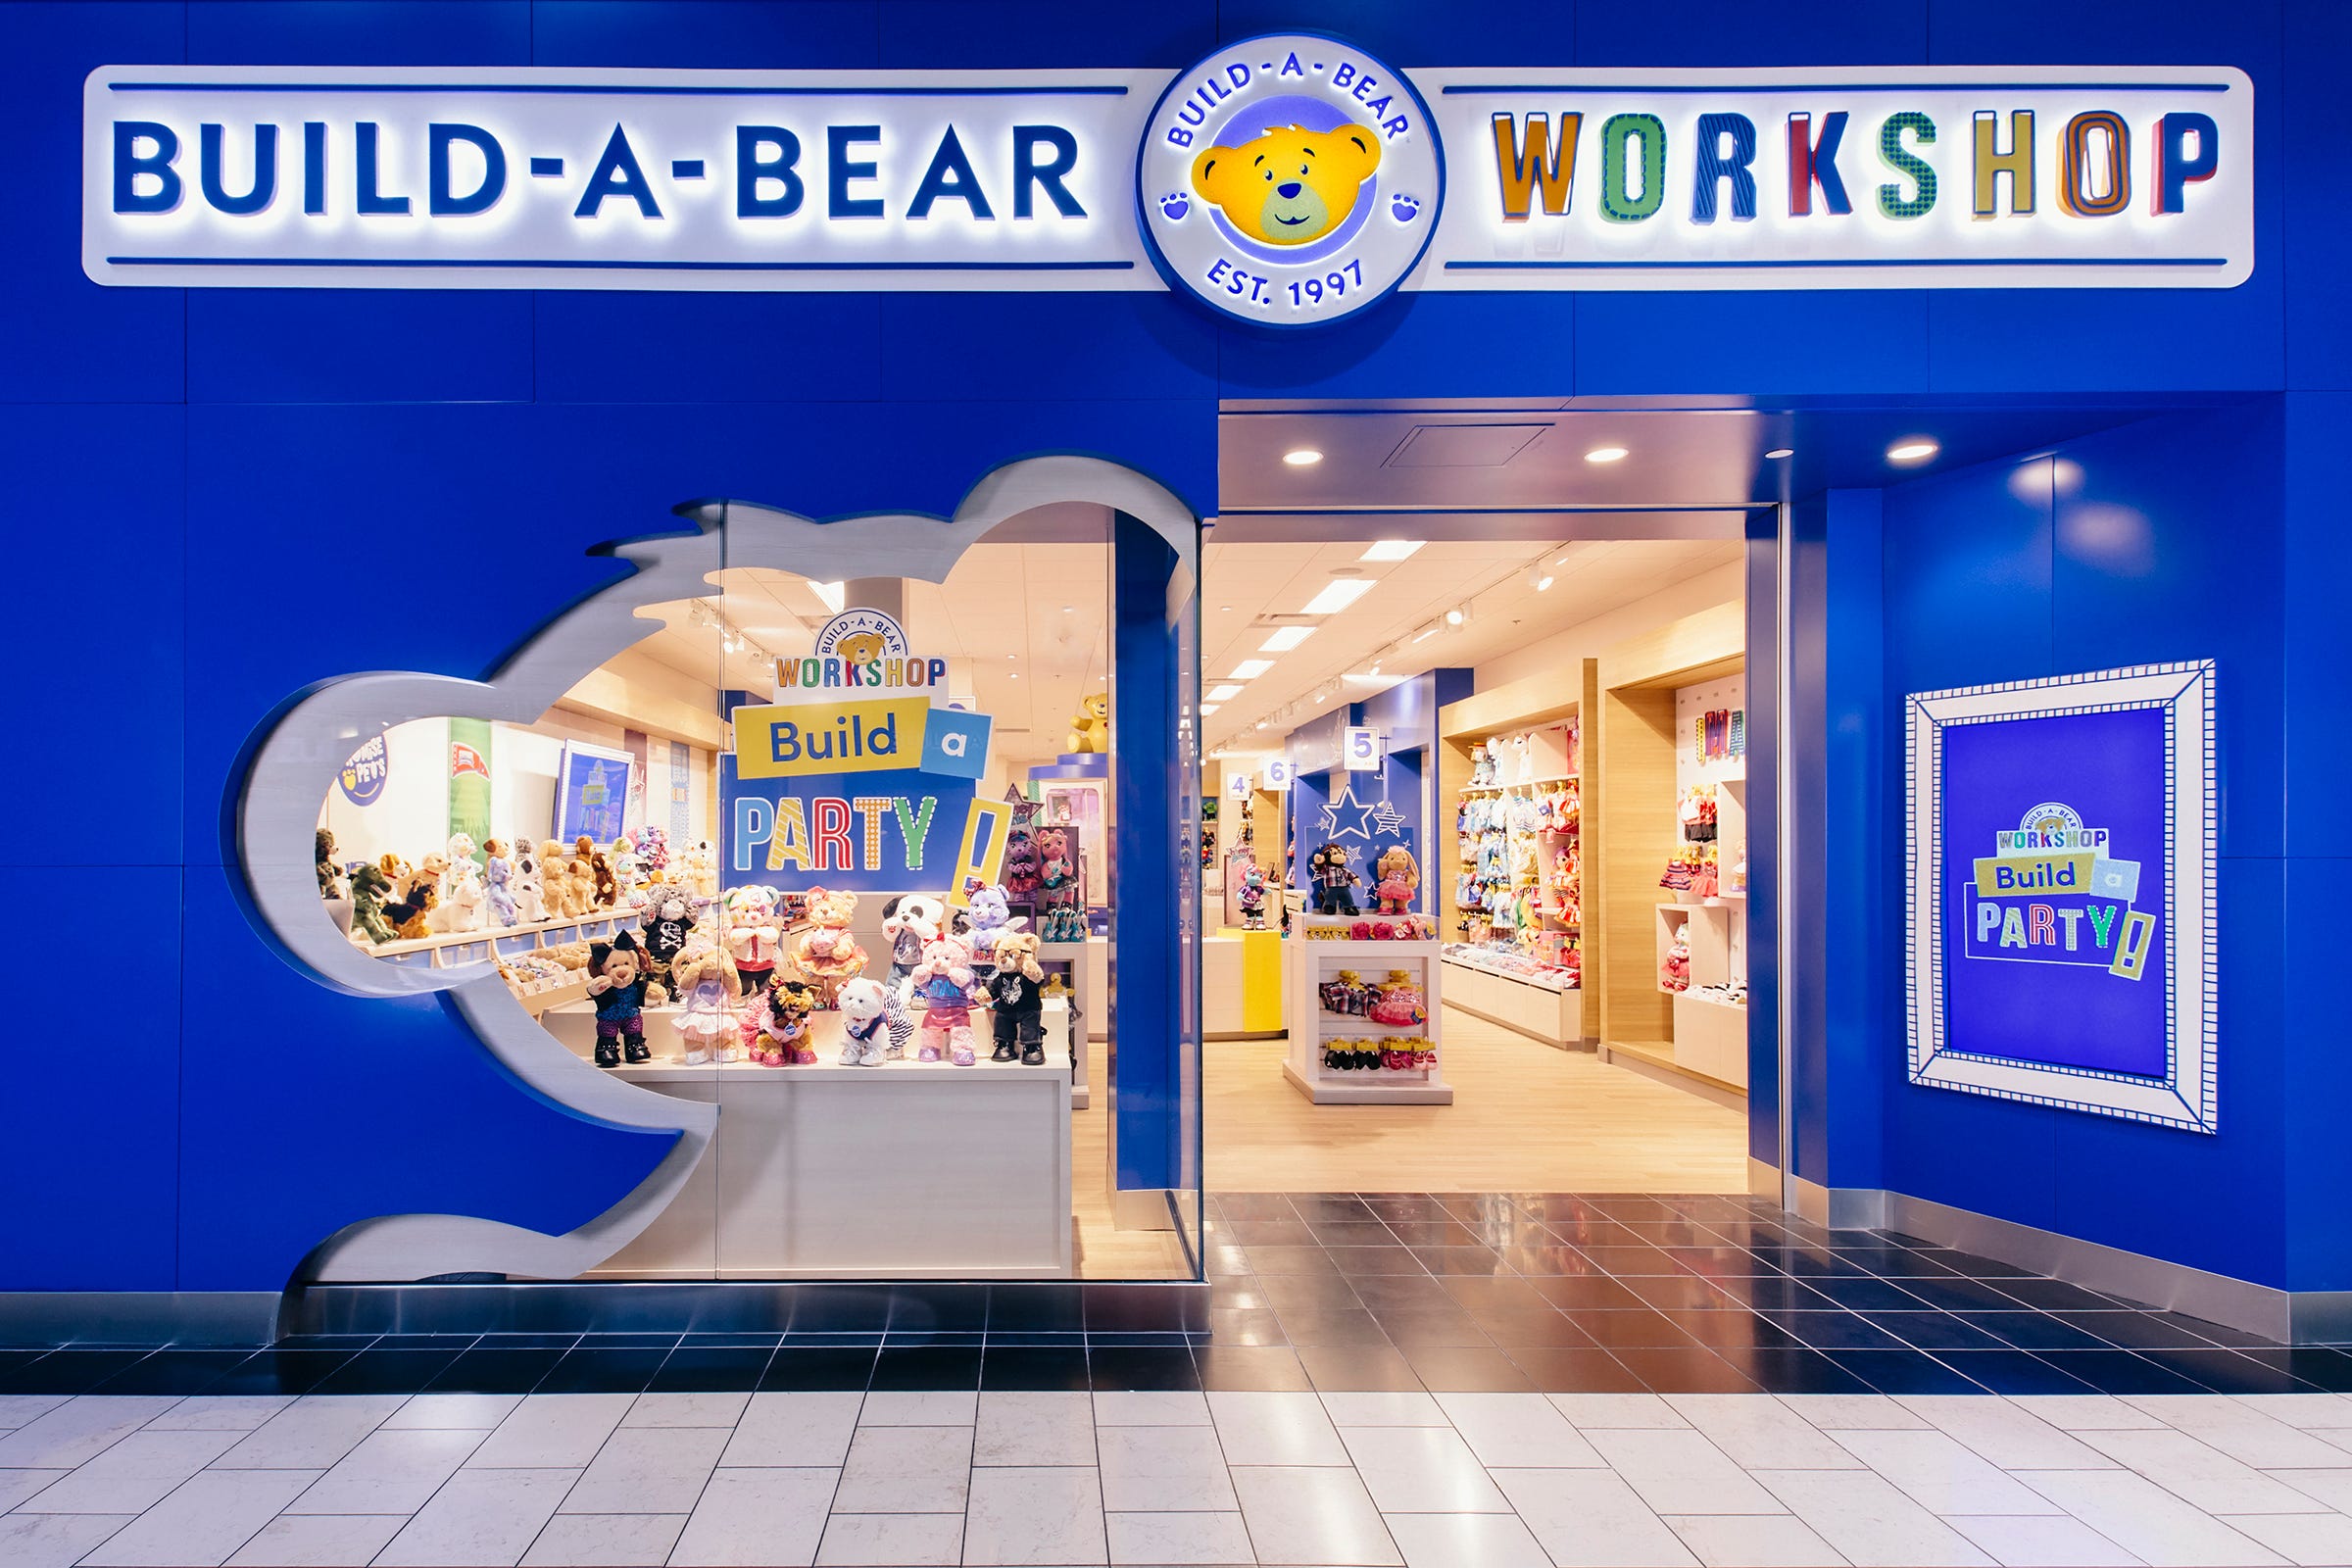 Details about   2019 Exclusive Limited Edition Build A Bear National Teddy Bear Stuffed Animal 